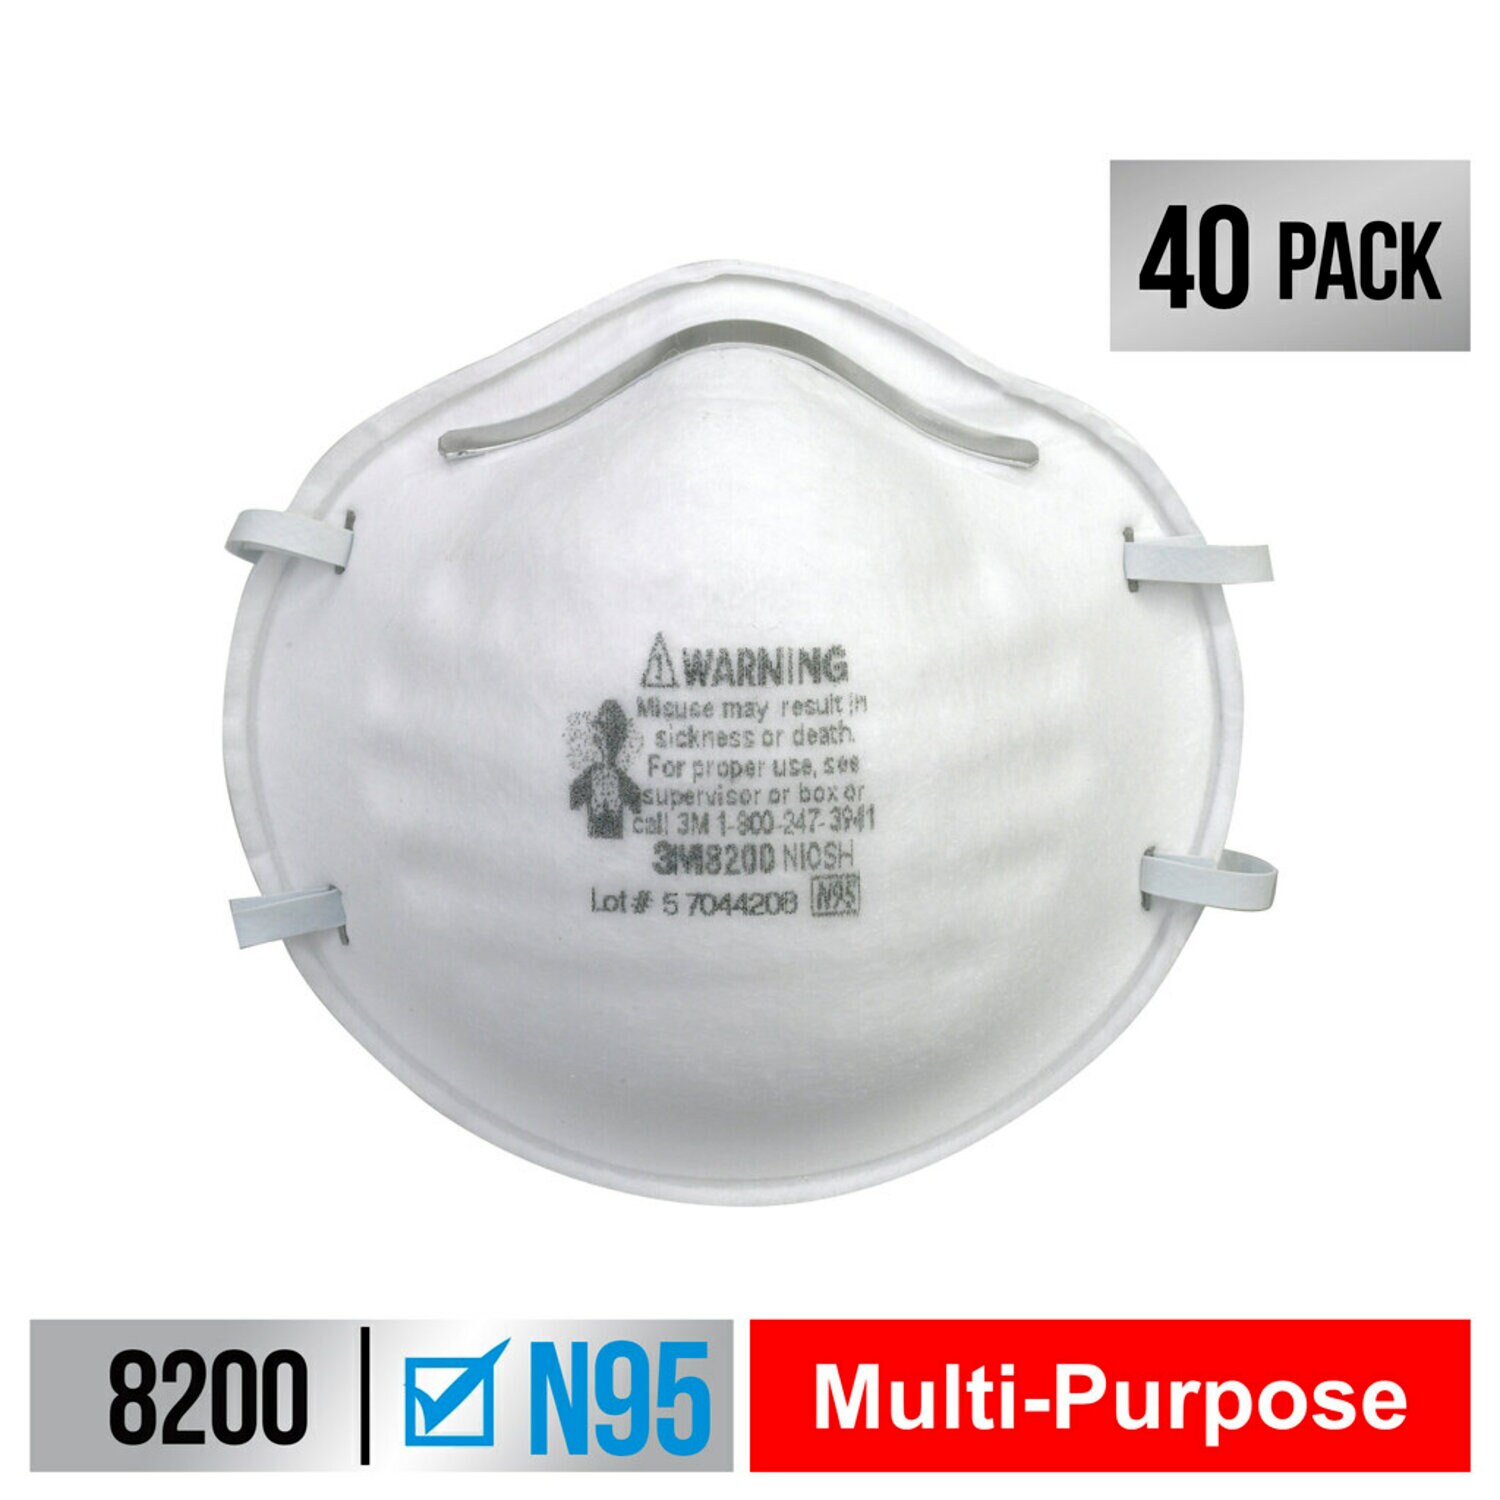 7100159546 - 3M Sanding and Fiberglass Respirator N95 Particulate, 8200H40-DC, 40
eaches/pack, 4 packs/case